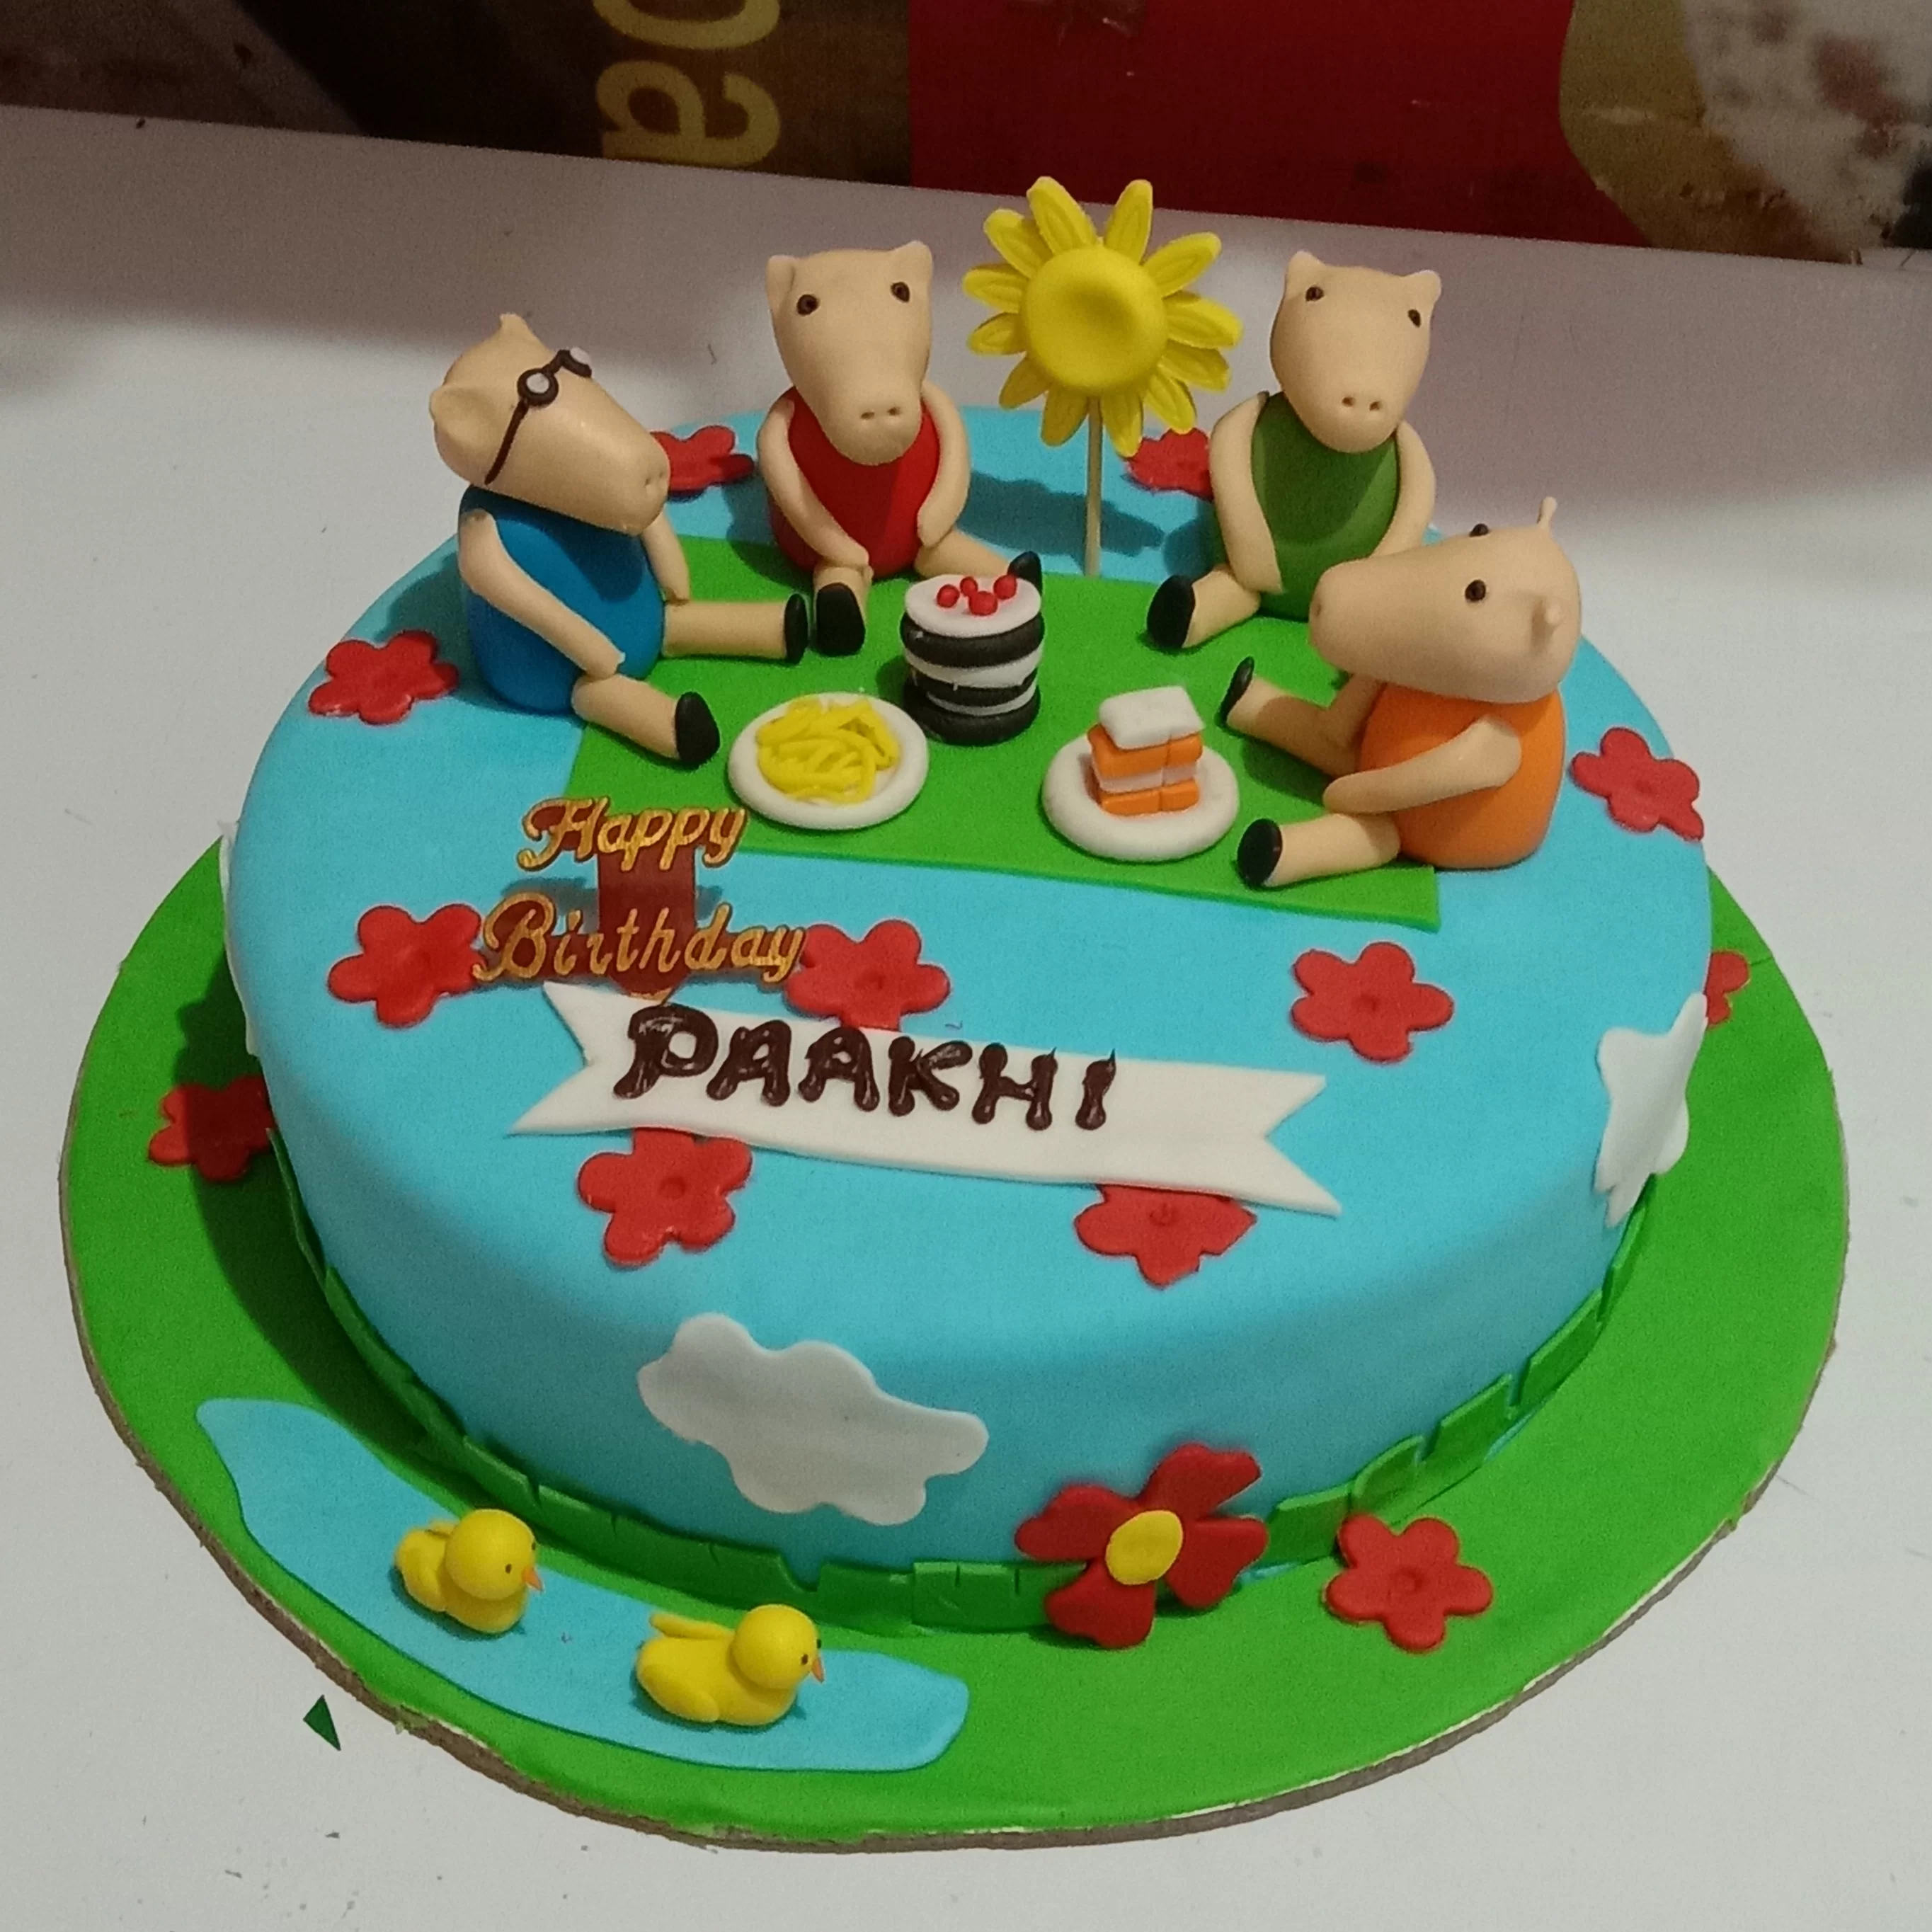 Peppa Pig Fondant Cake Delivery in Delhi NCR - ₹1,649.00 Cake Express